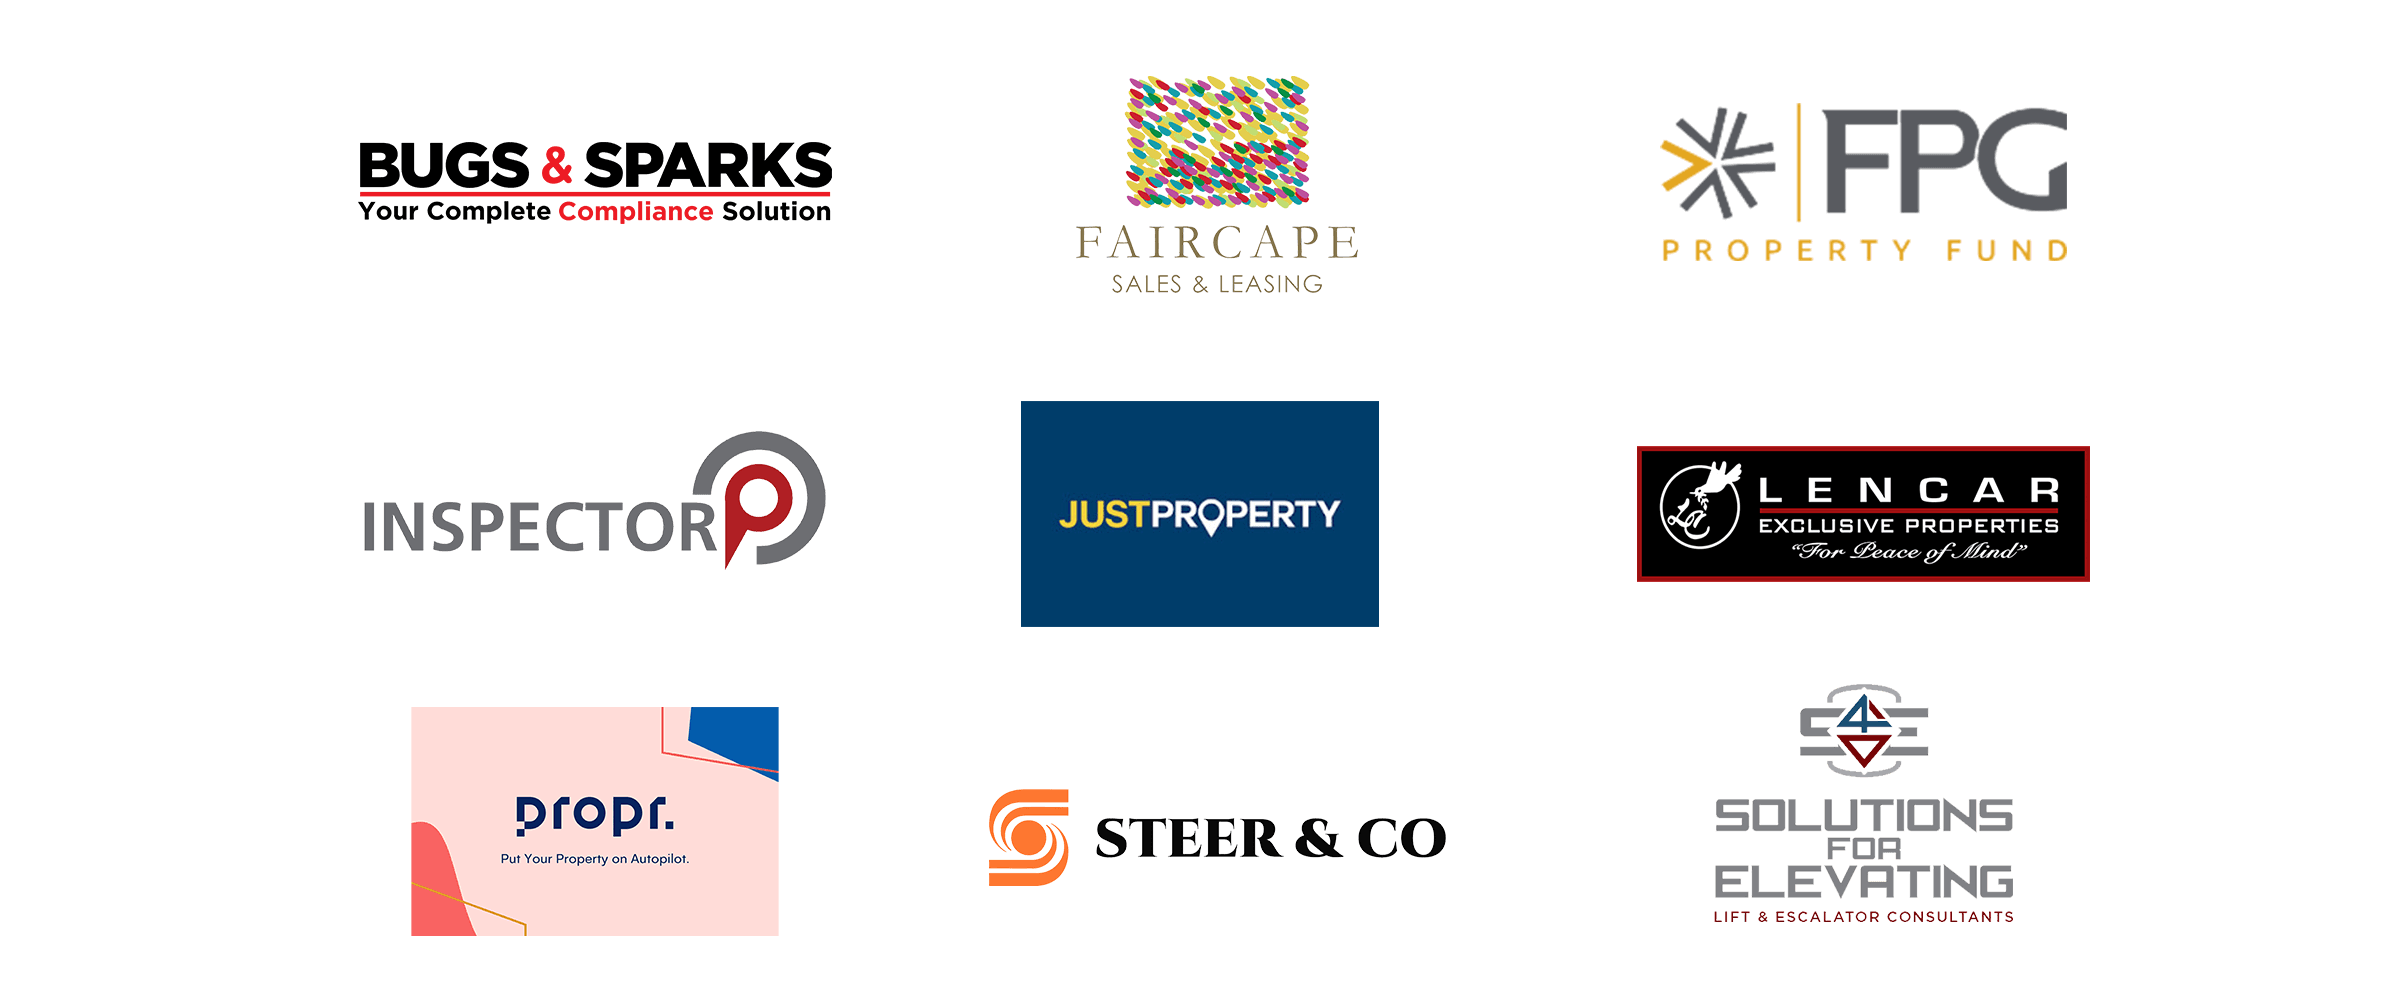 Some of our Clients